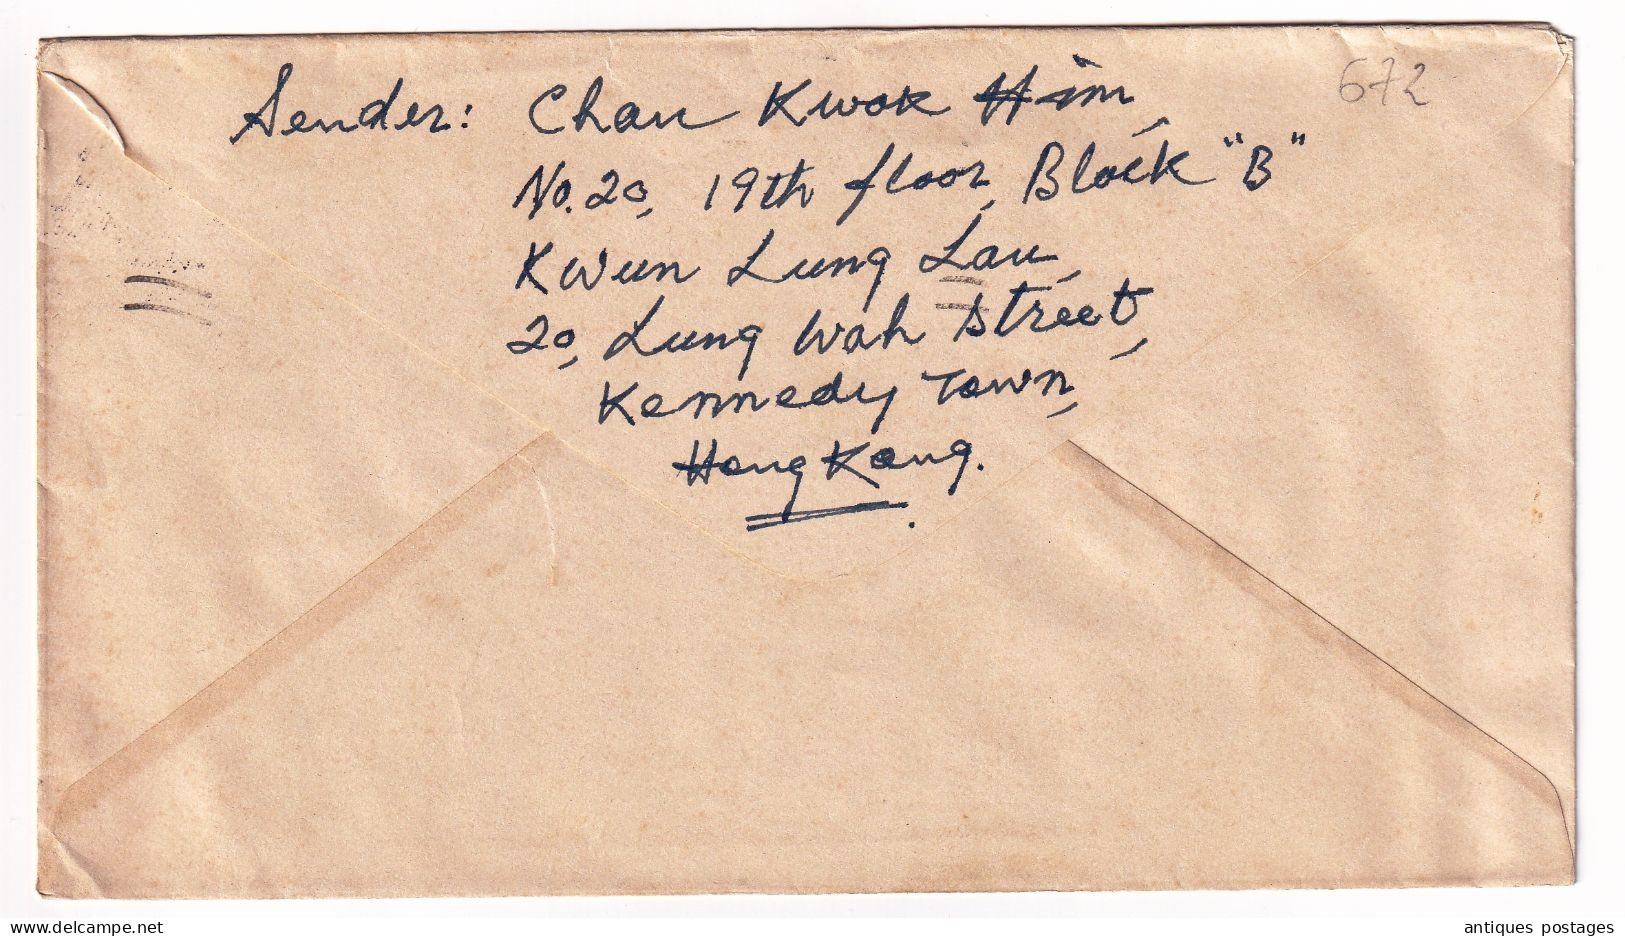 Lettre 1967 Hong Kong Chan Kwok Kim Chine China Singapore Singapour Stamp Queen Elizabeth II Seet Lee Pong - Covers & Documents